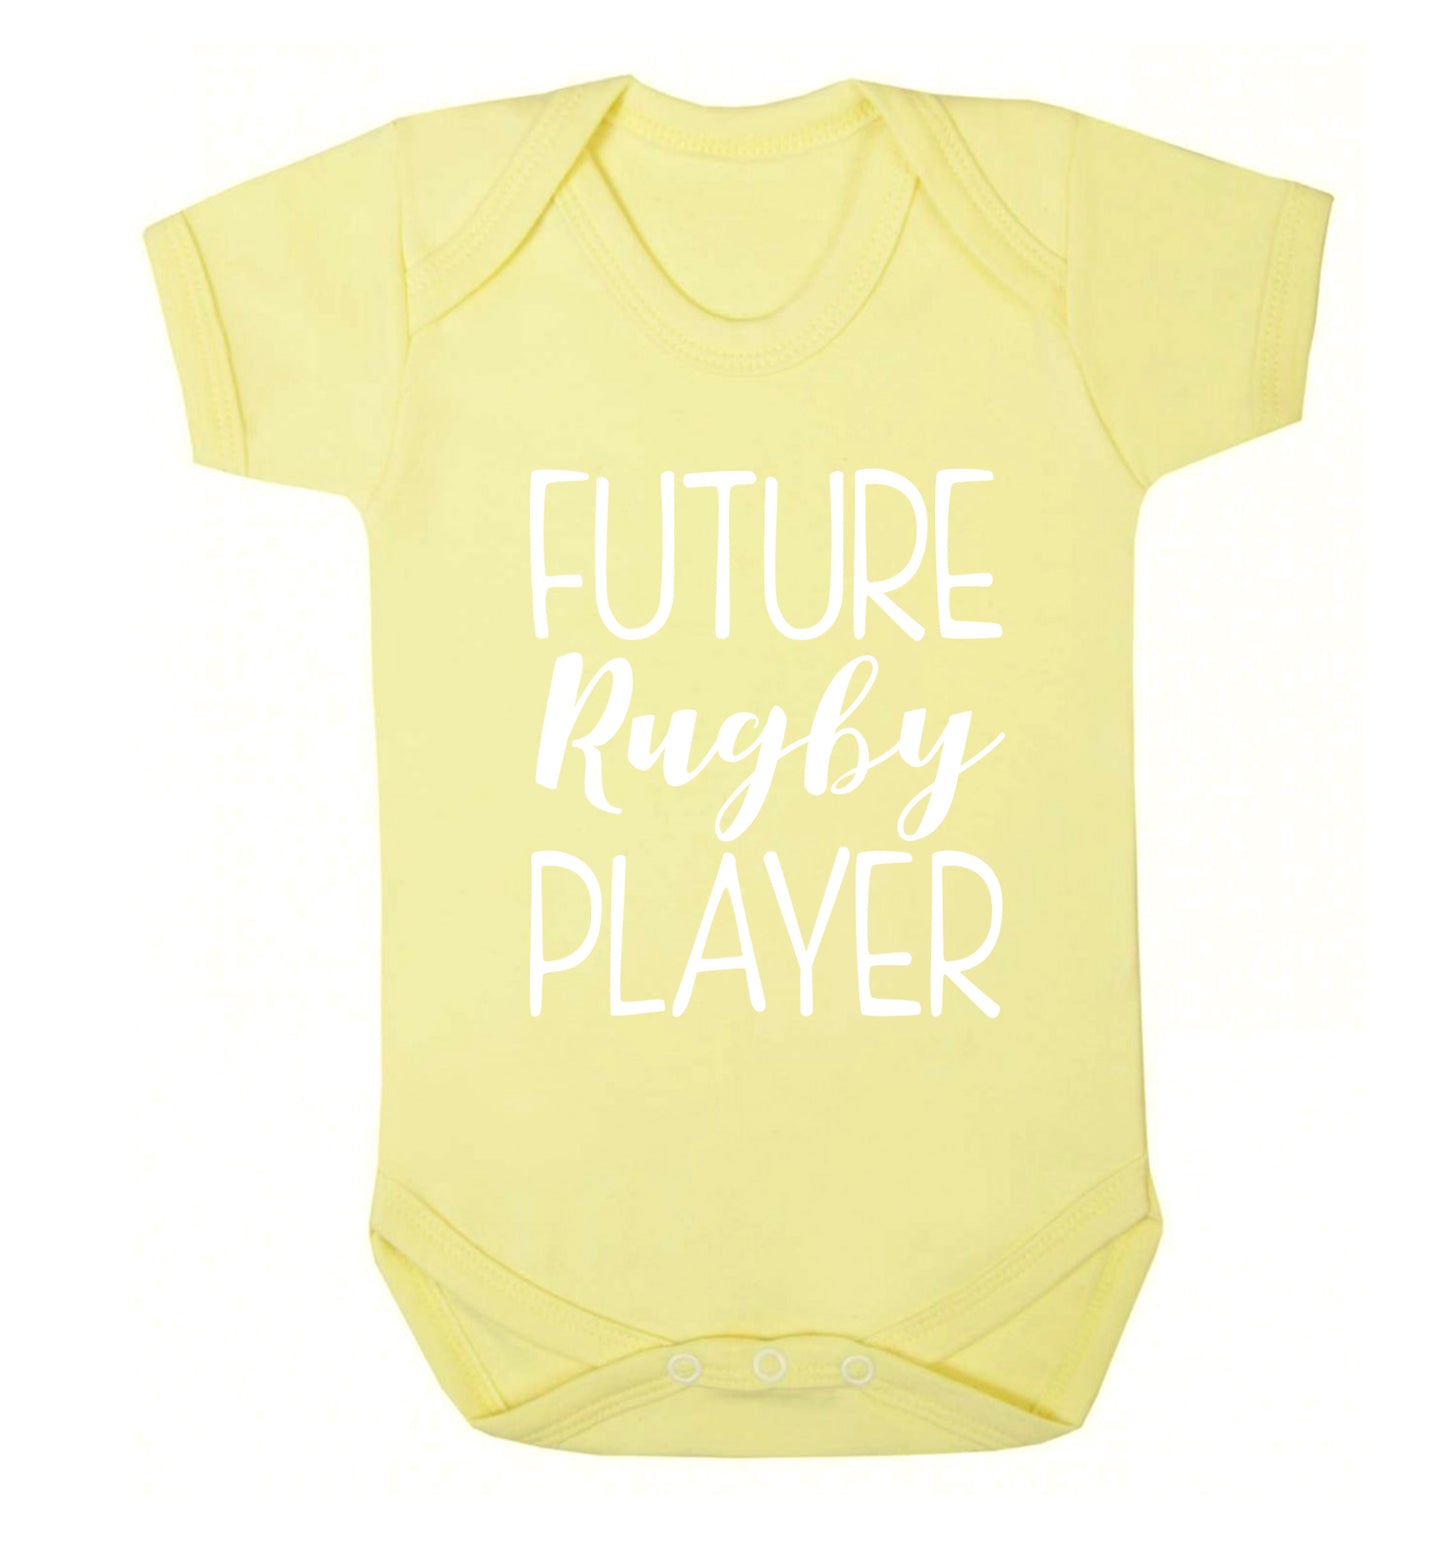 Future rugby player Baby Vest pale yellow 18-24 months